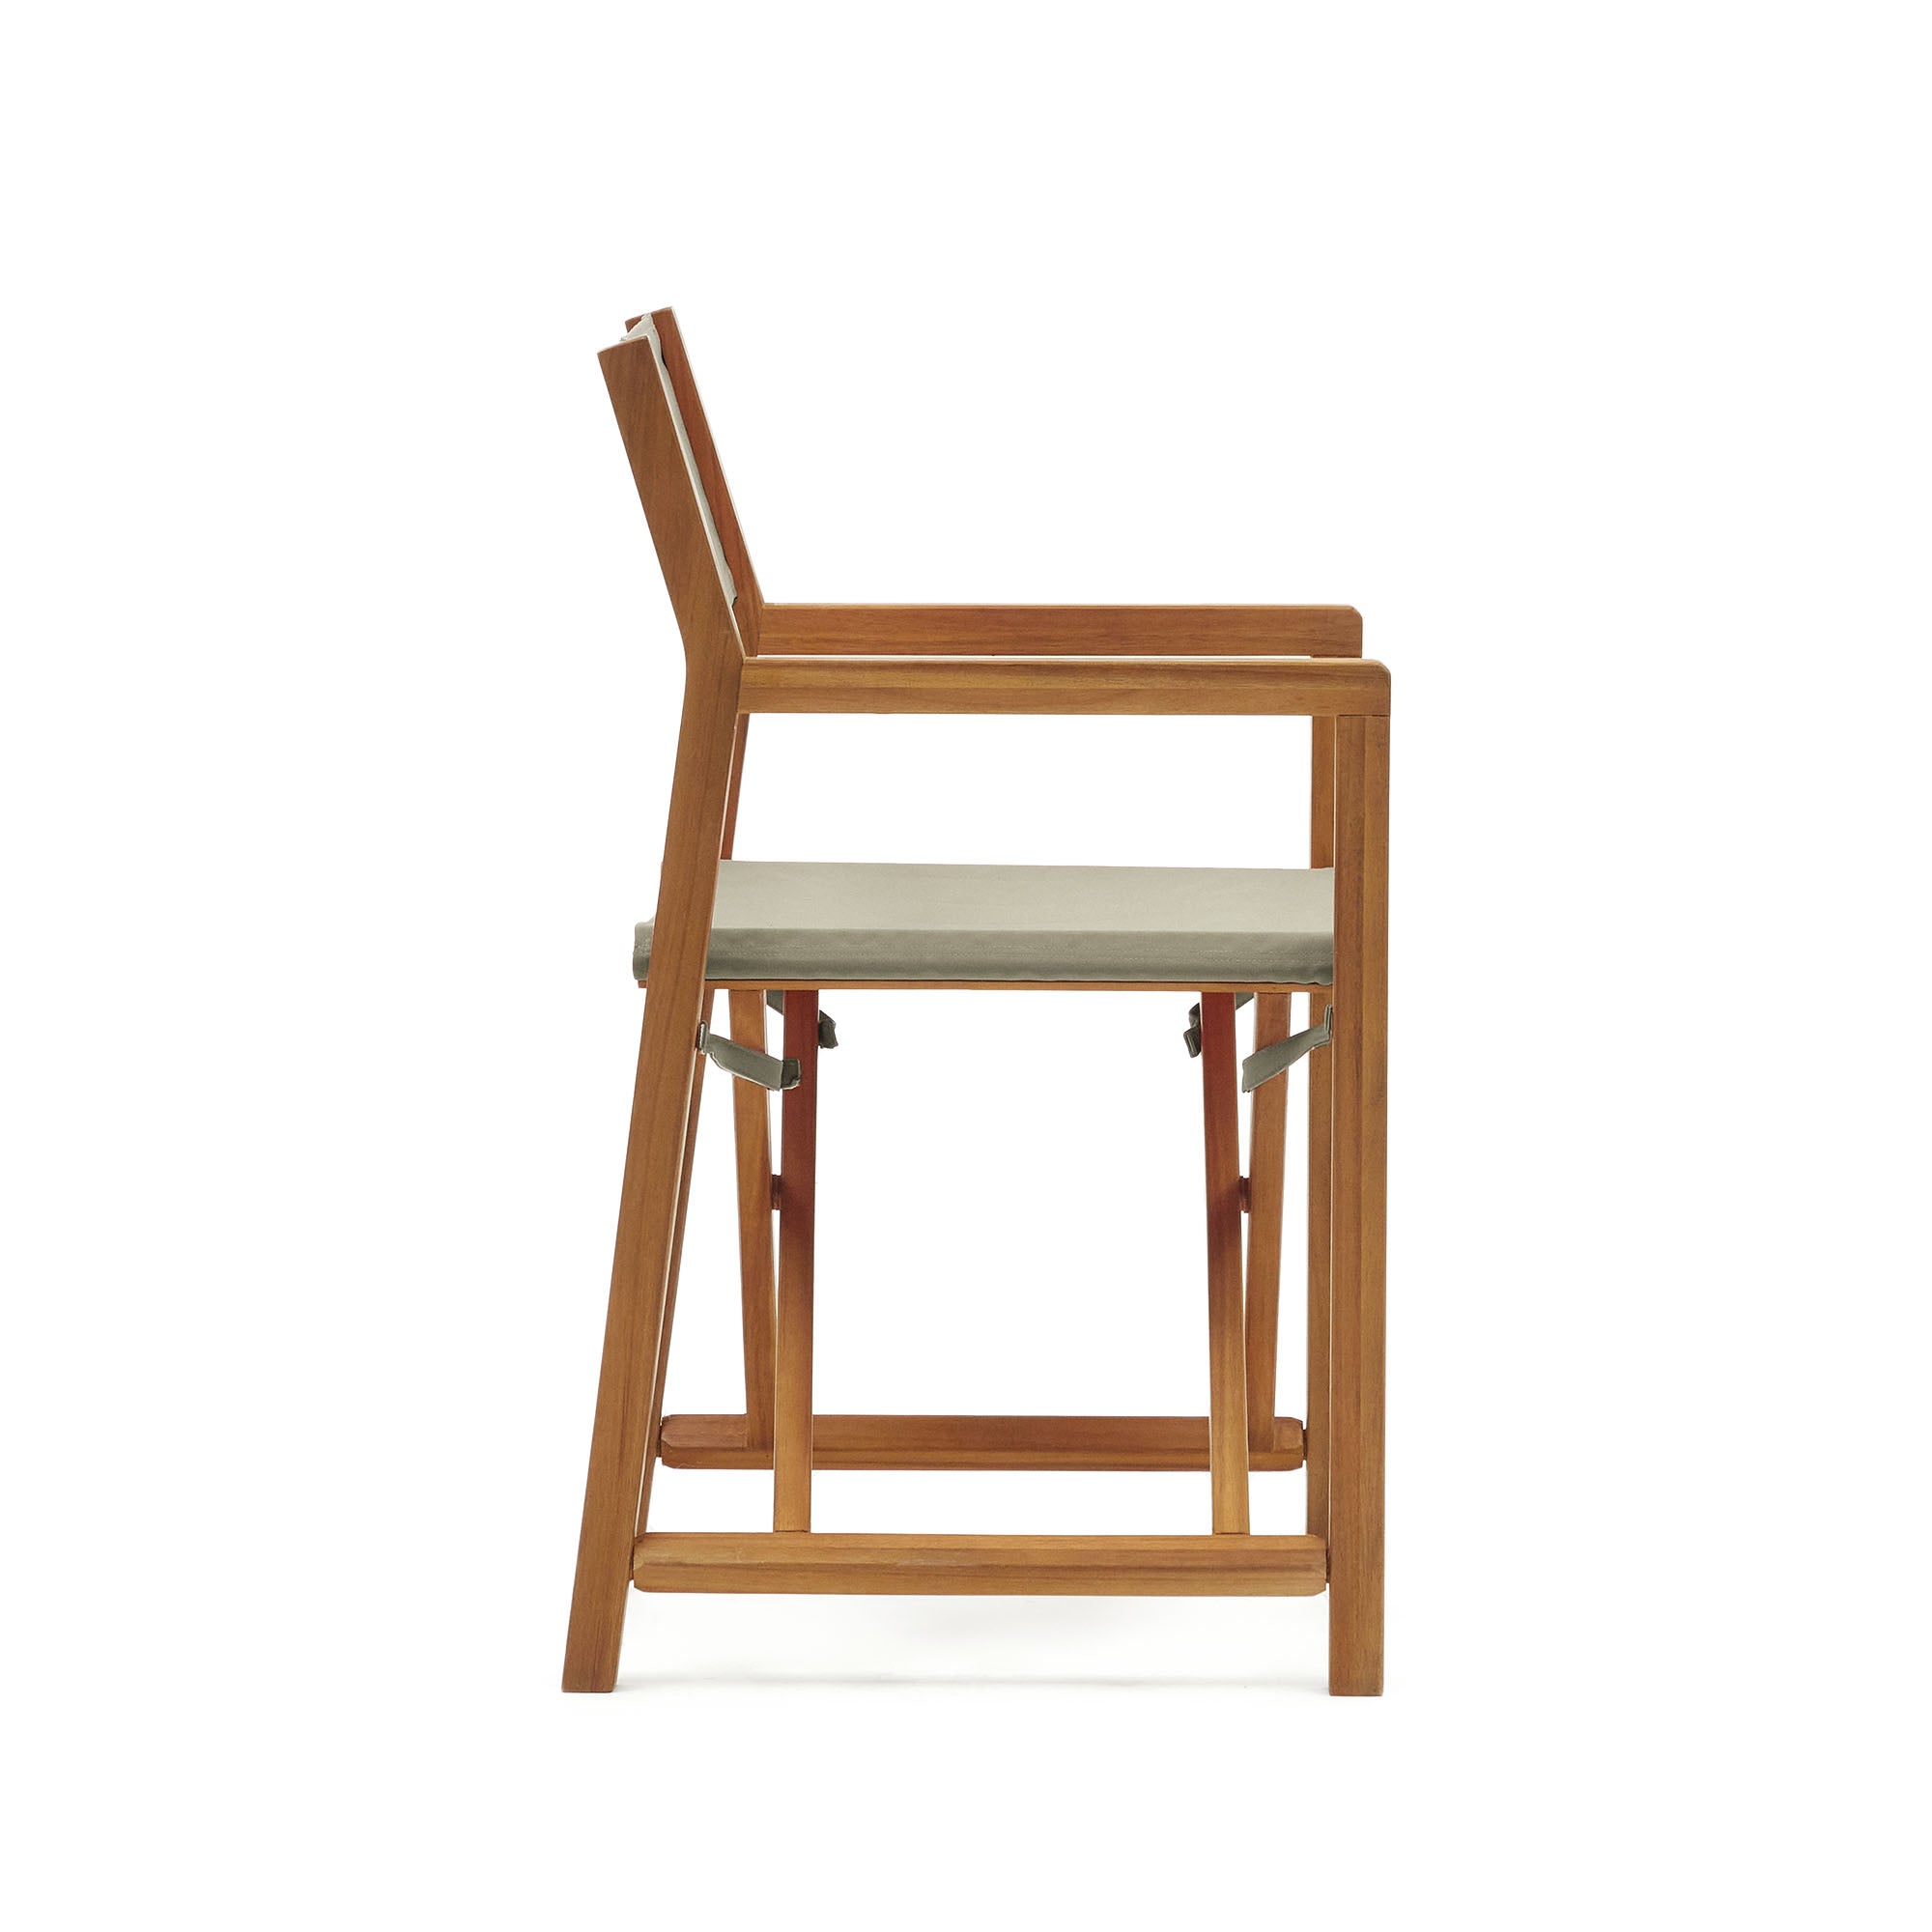 Thianna folding outdoor chair in green with solid acacia wood FSC 100%